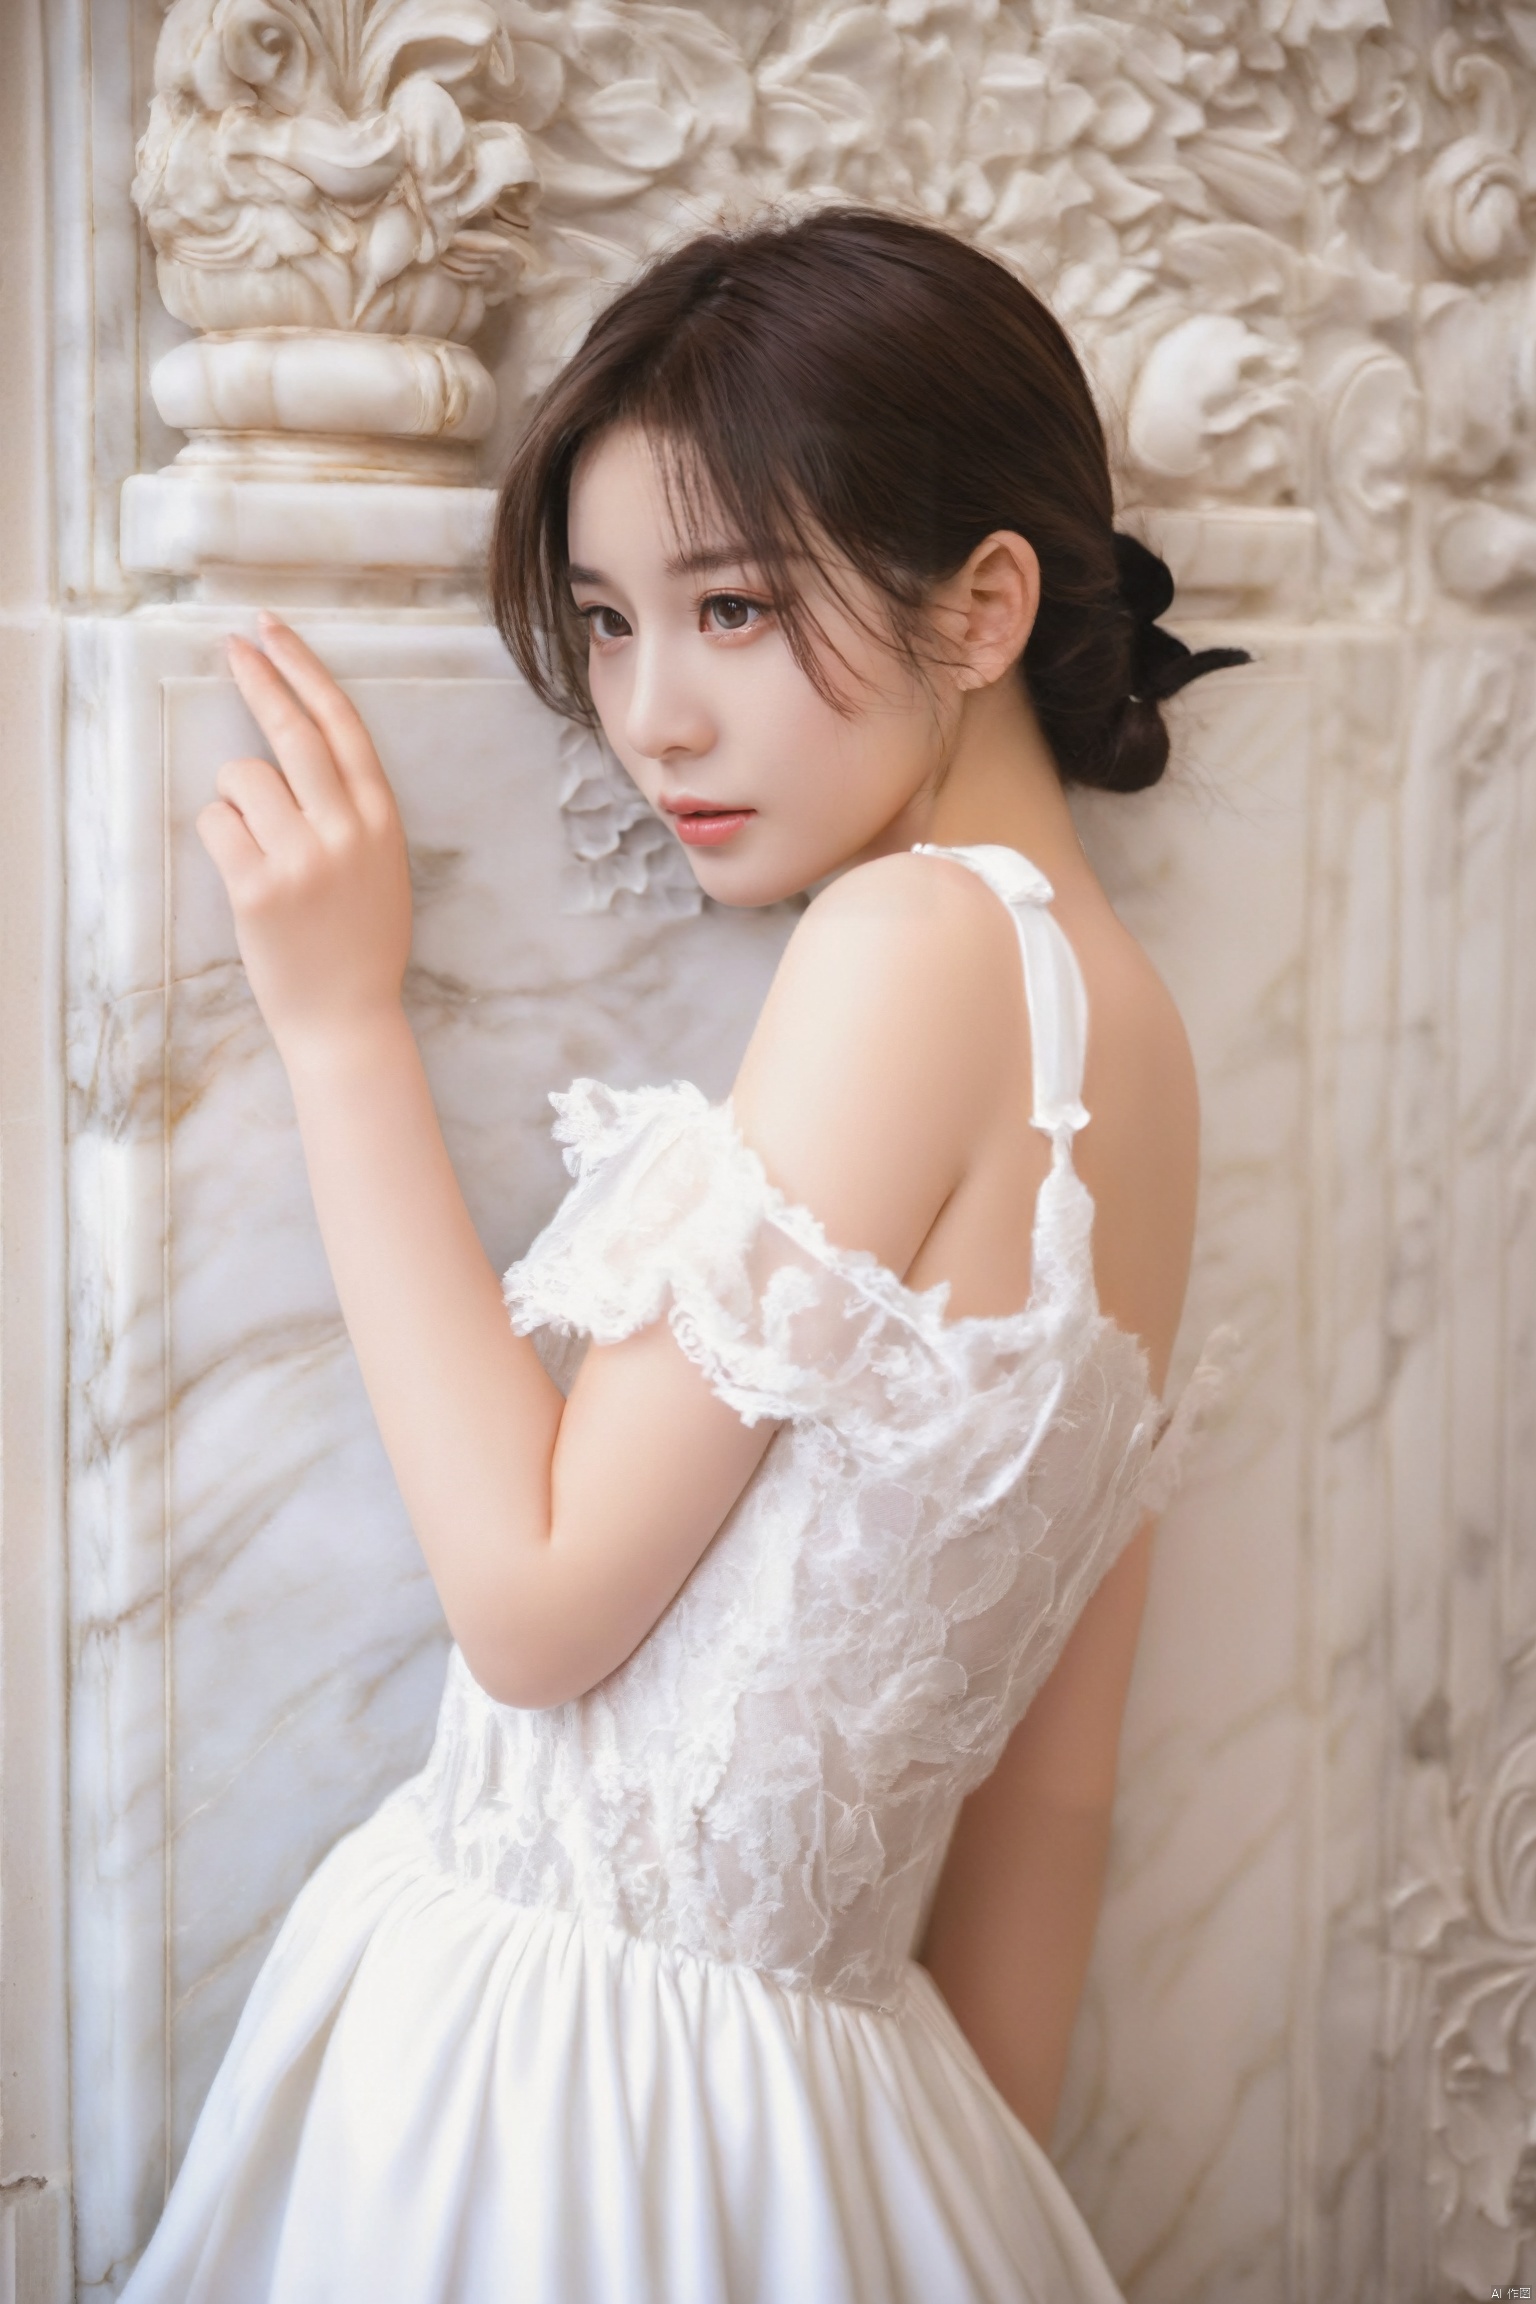 araffe asian woman in white dress leaning against a wall, a marble sculpture by Nagasawa Rosetsu, pixiv, rococo, smooth translucent white skin, realistic young gravure idol, young sensual gravure idol